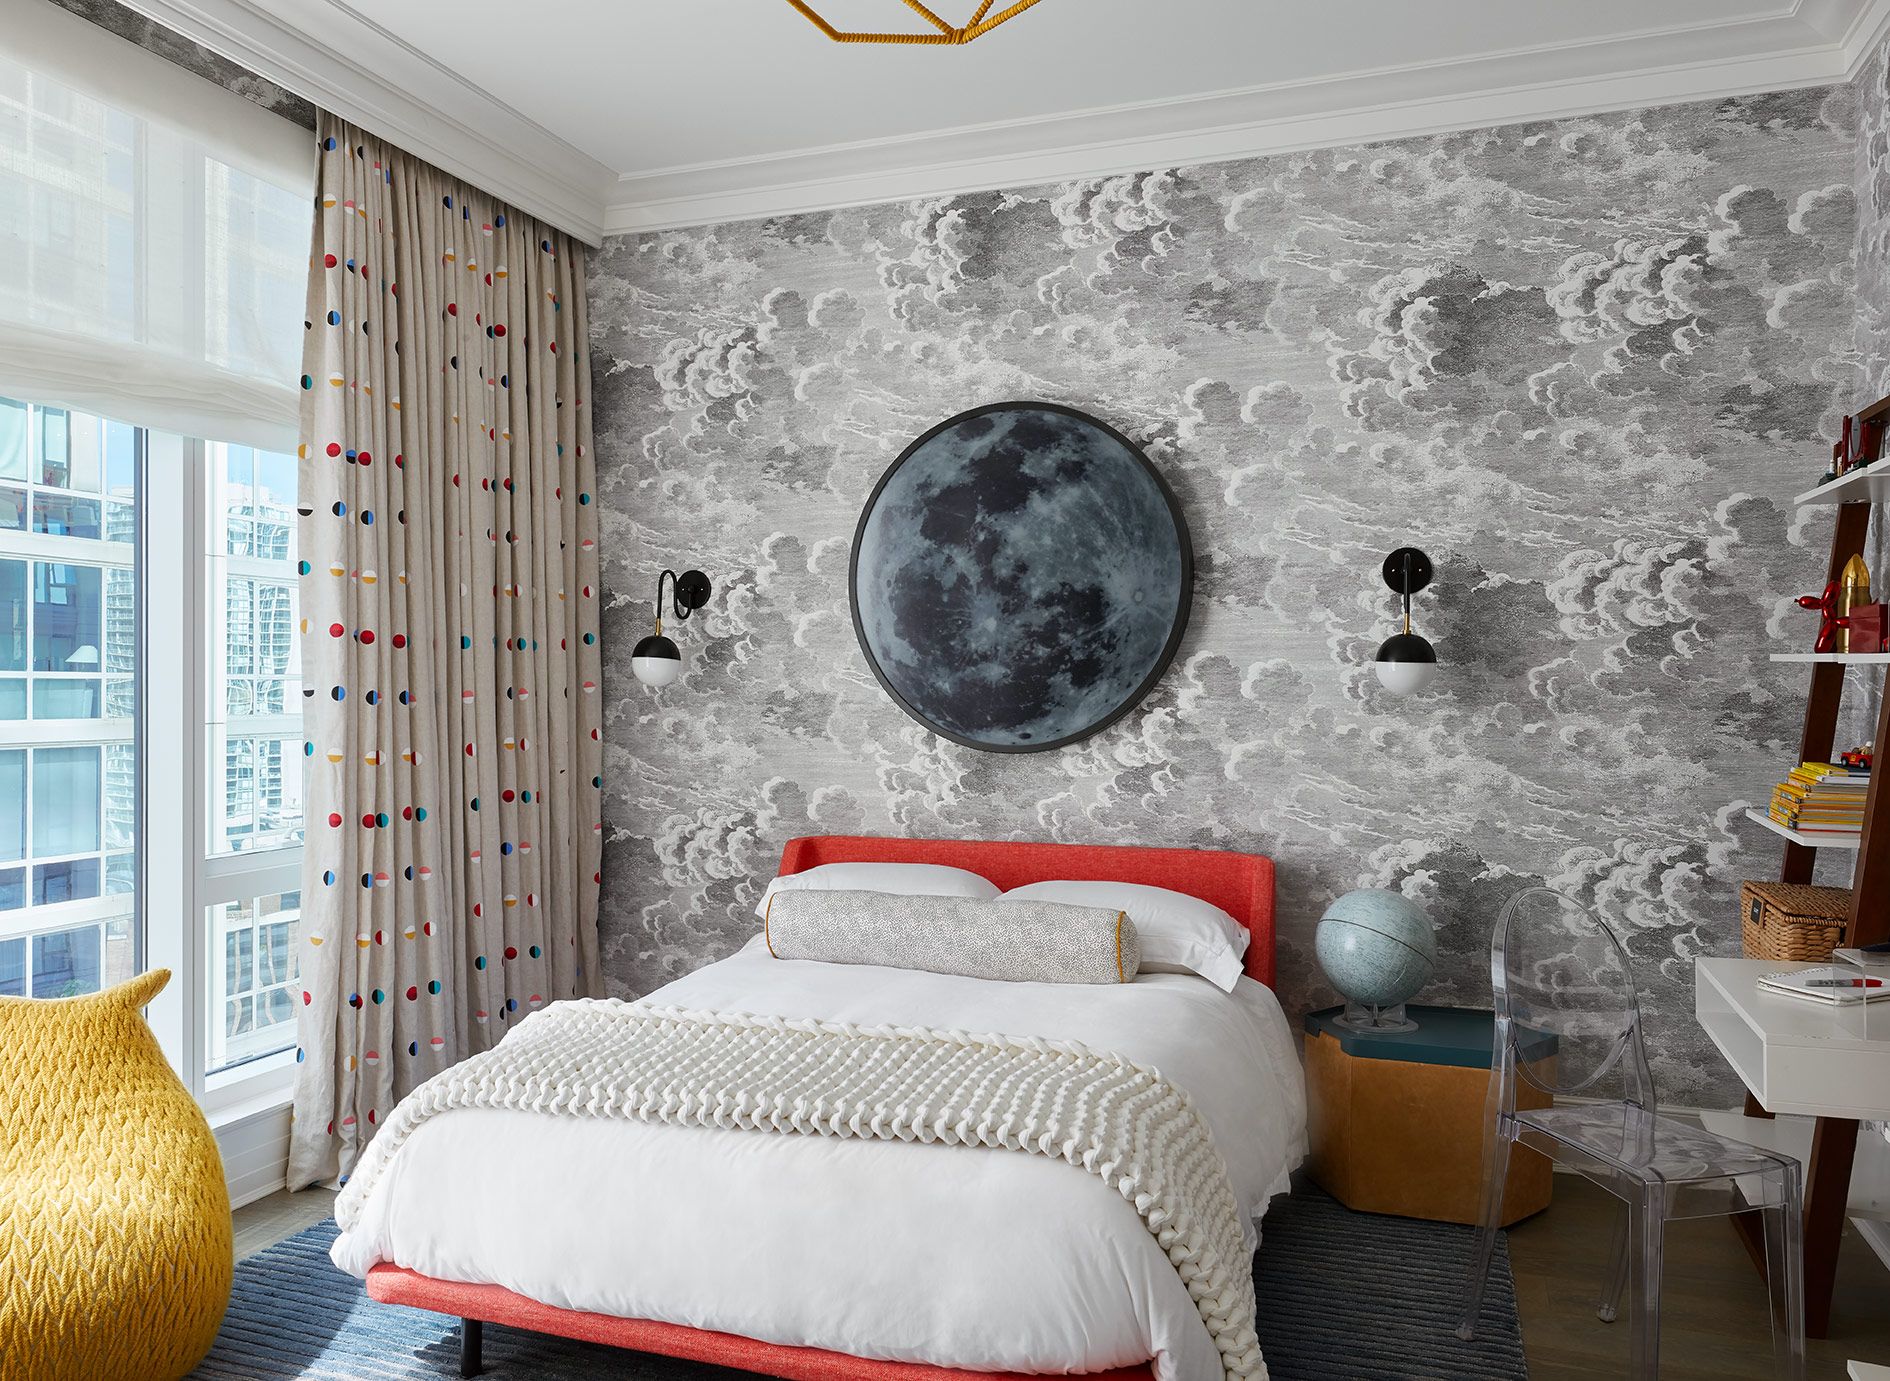 Boys Bedroom incorporating grey clouds wallcovering, red upholstered bed, moon light above bed.